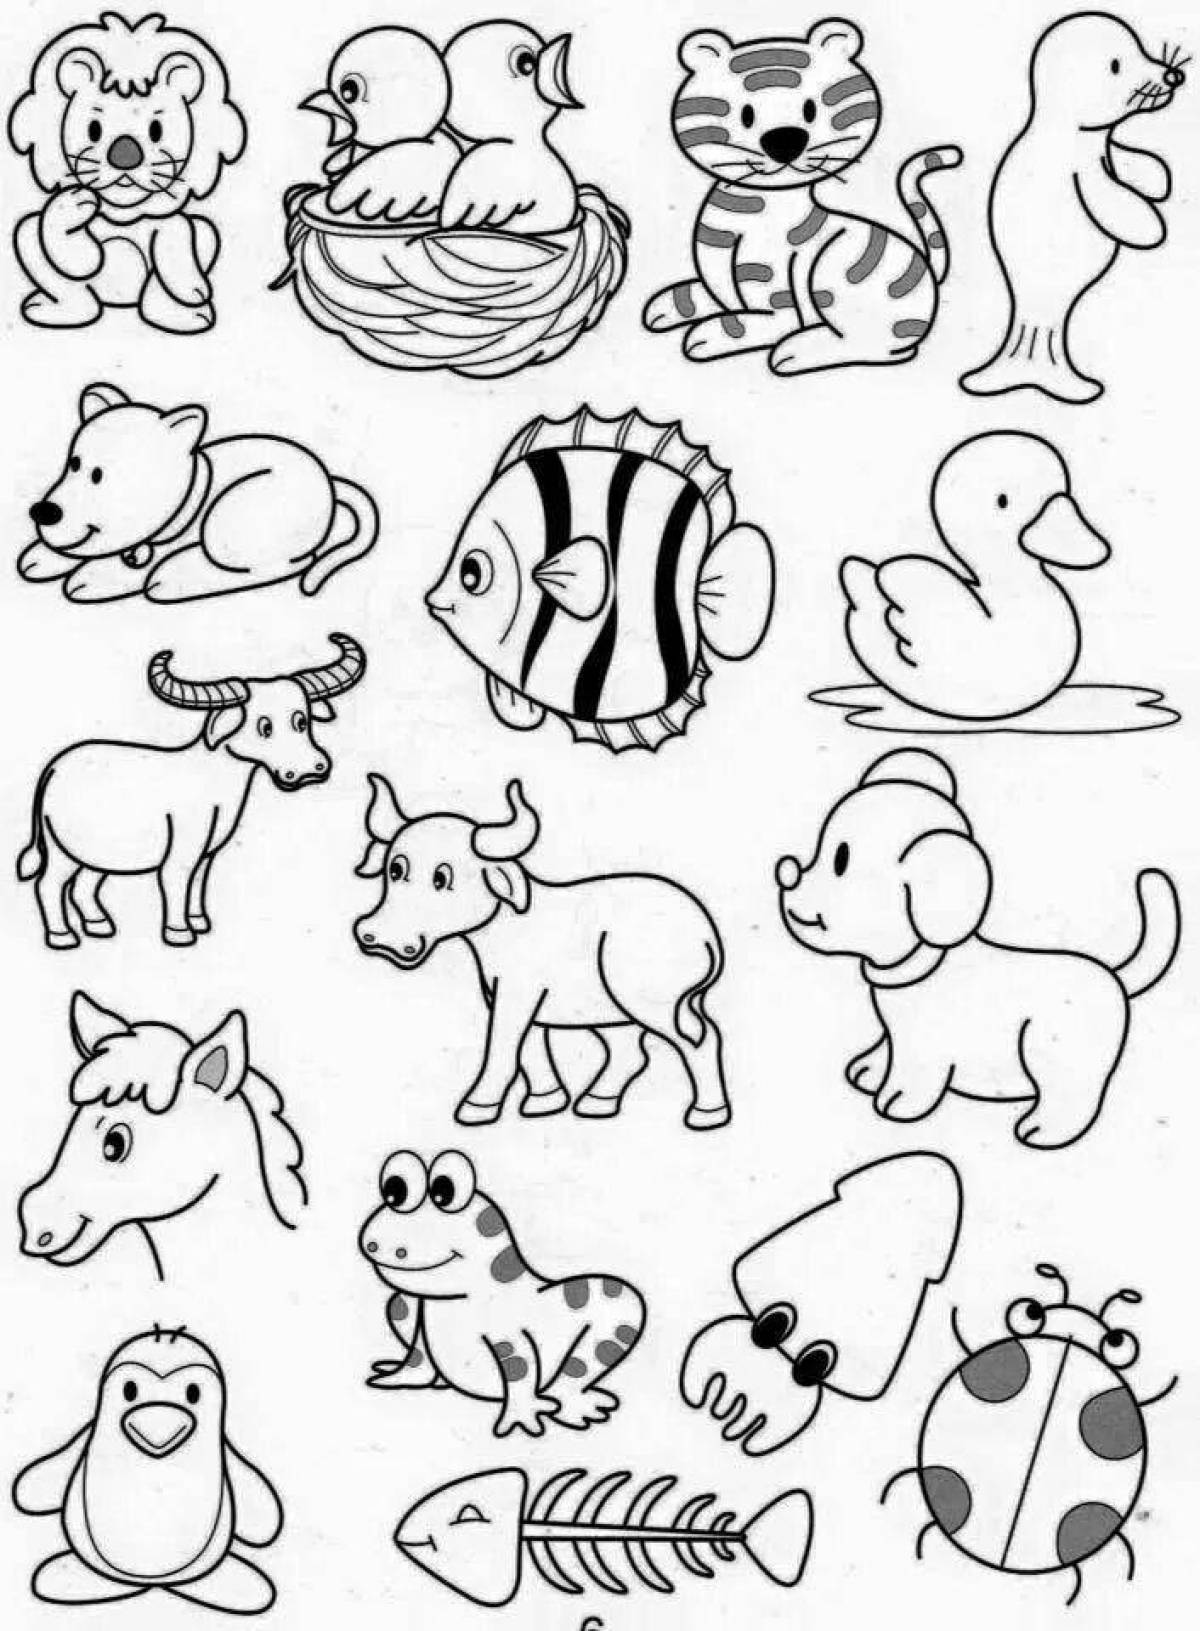 Colorful many small coloring pages on one sheet